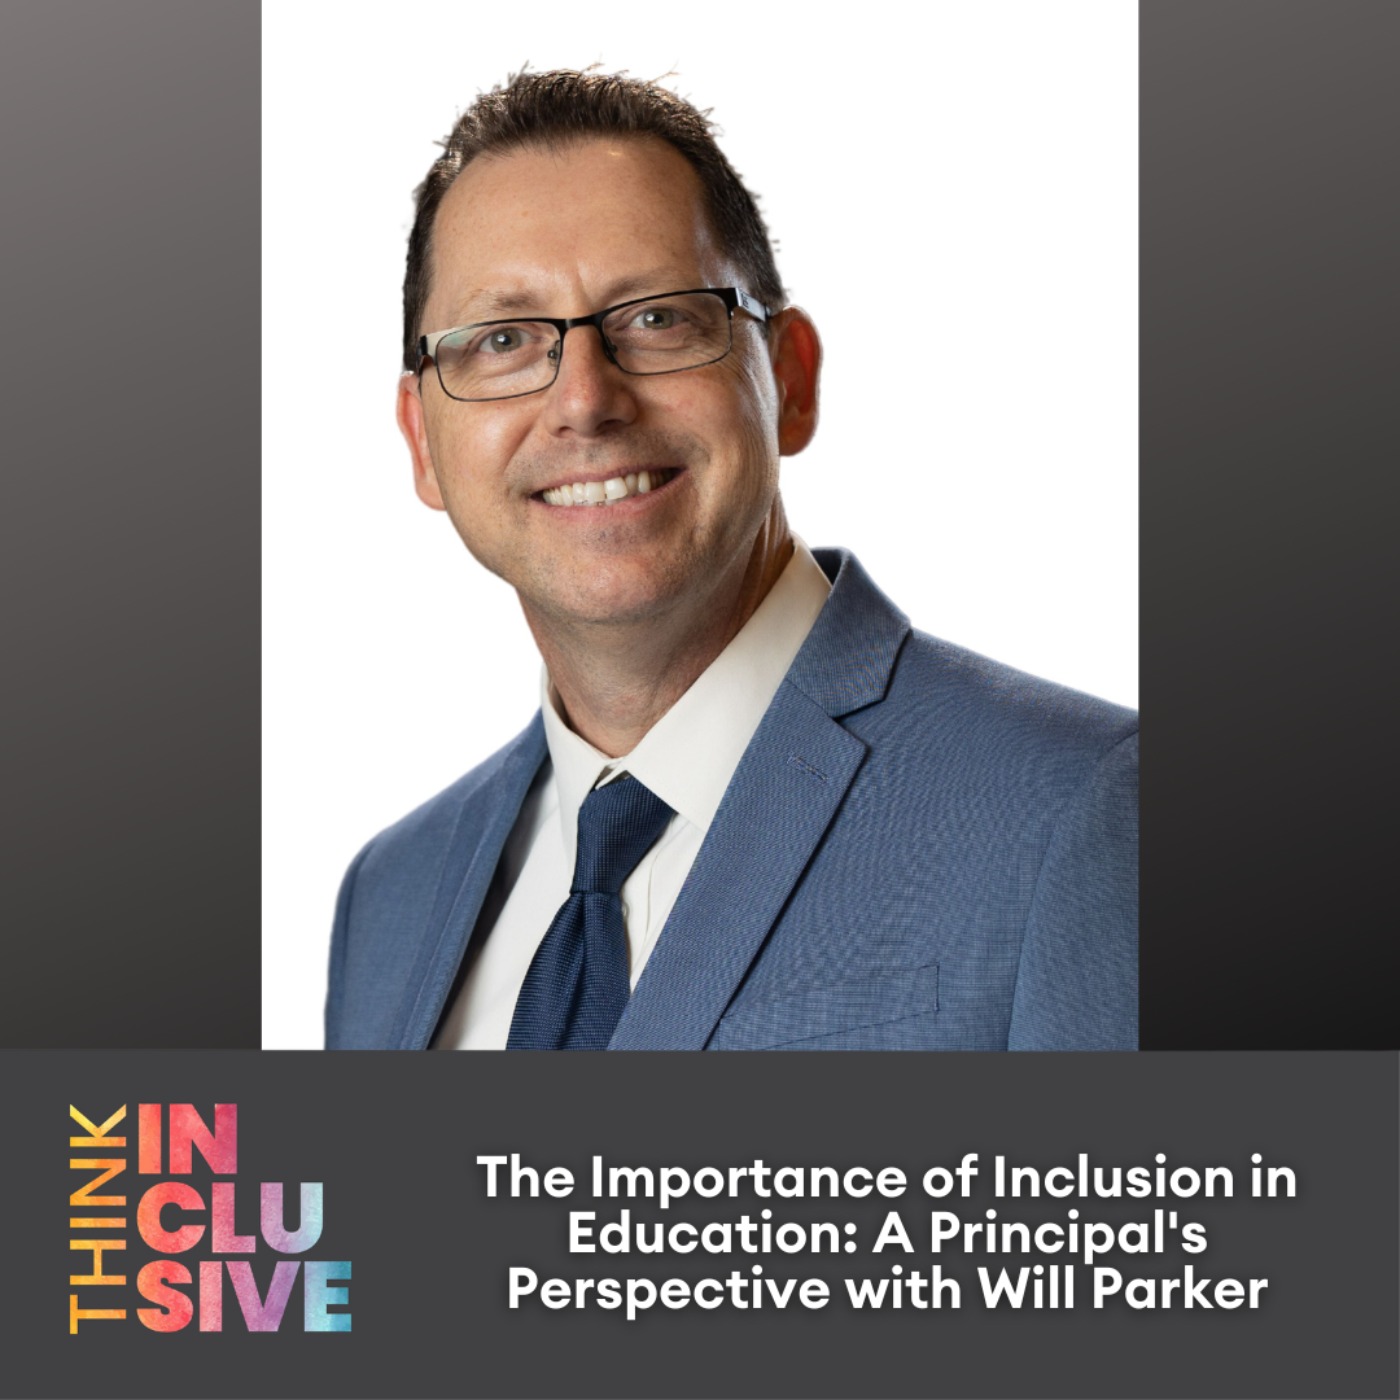 The Importance of Inclusion in Education: A Principal's Perspective with Will Parker